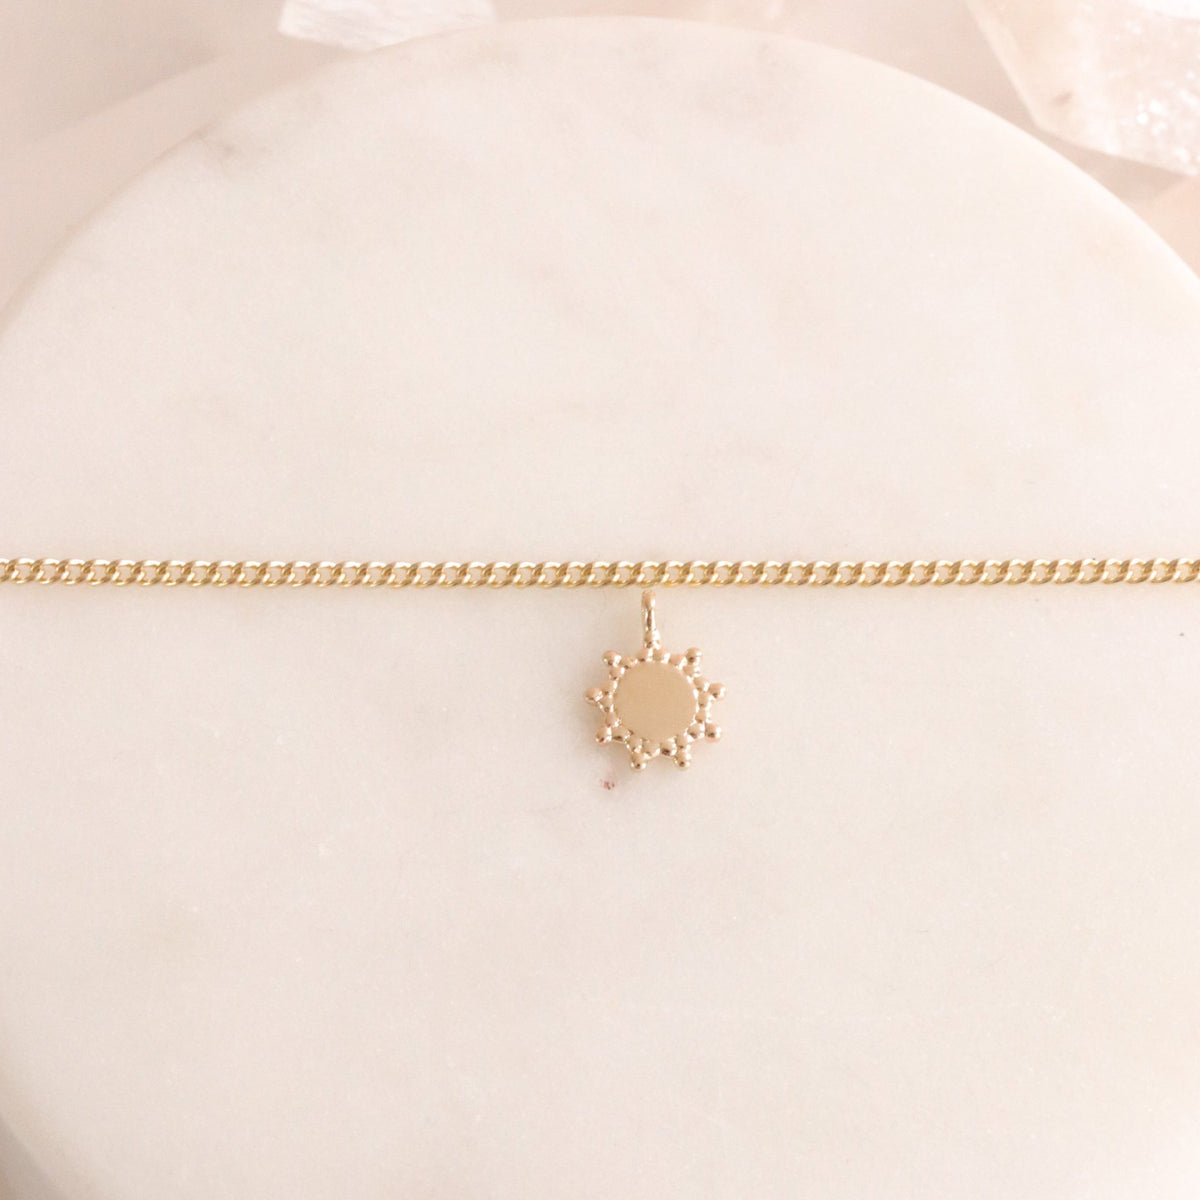 BELIEVE SOLEIL NAMESAKE CHARM - 14K SOLID GOLD - SO PRETTY CARA COTTER